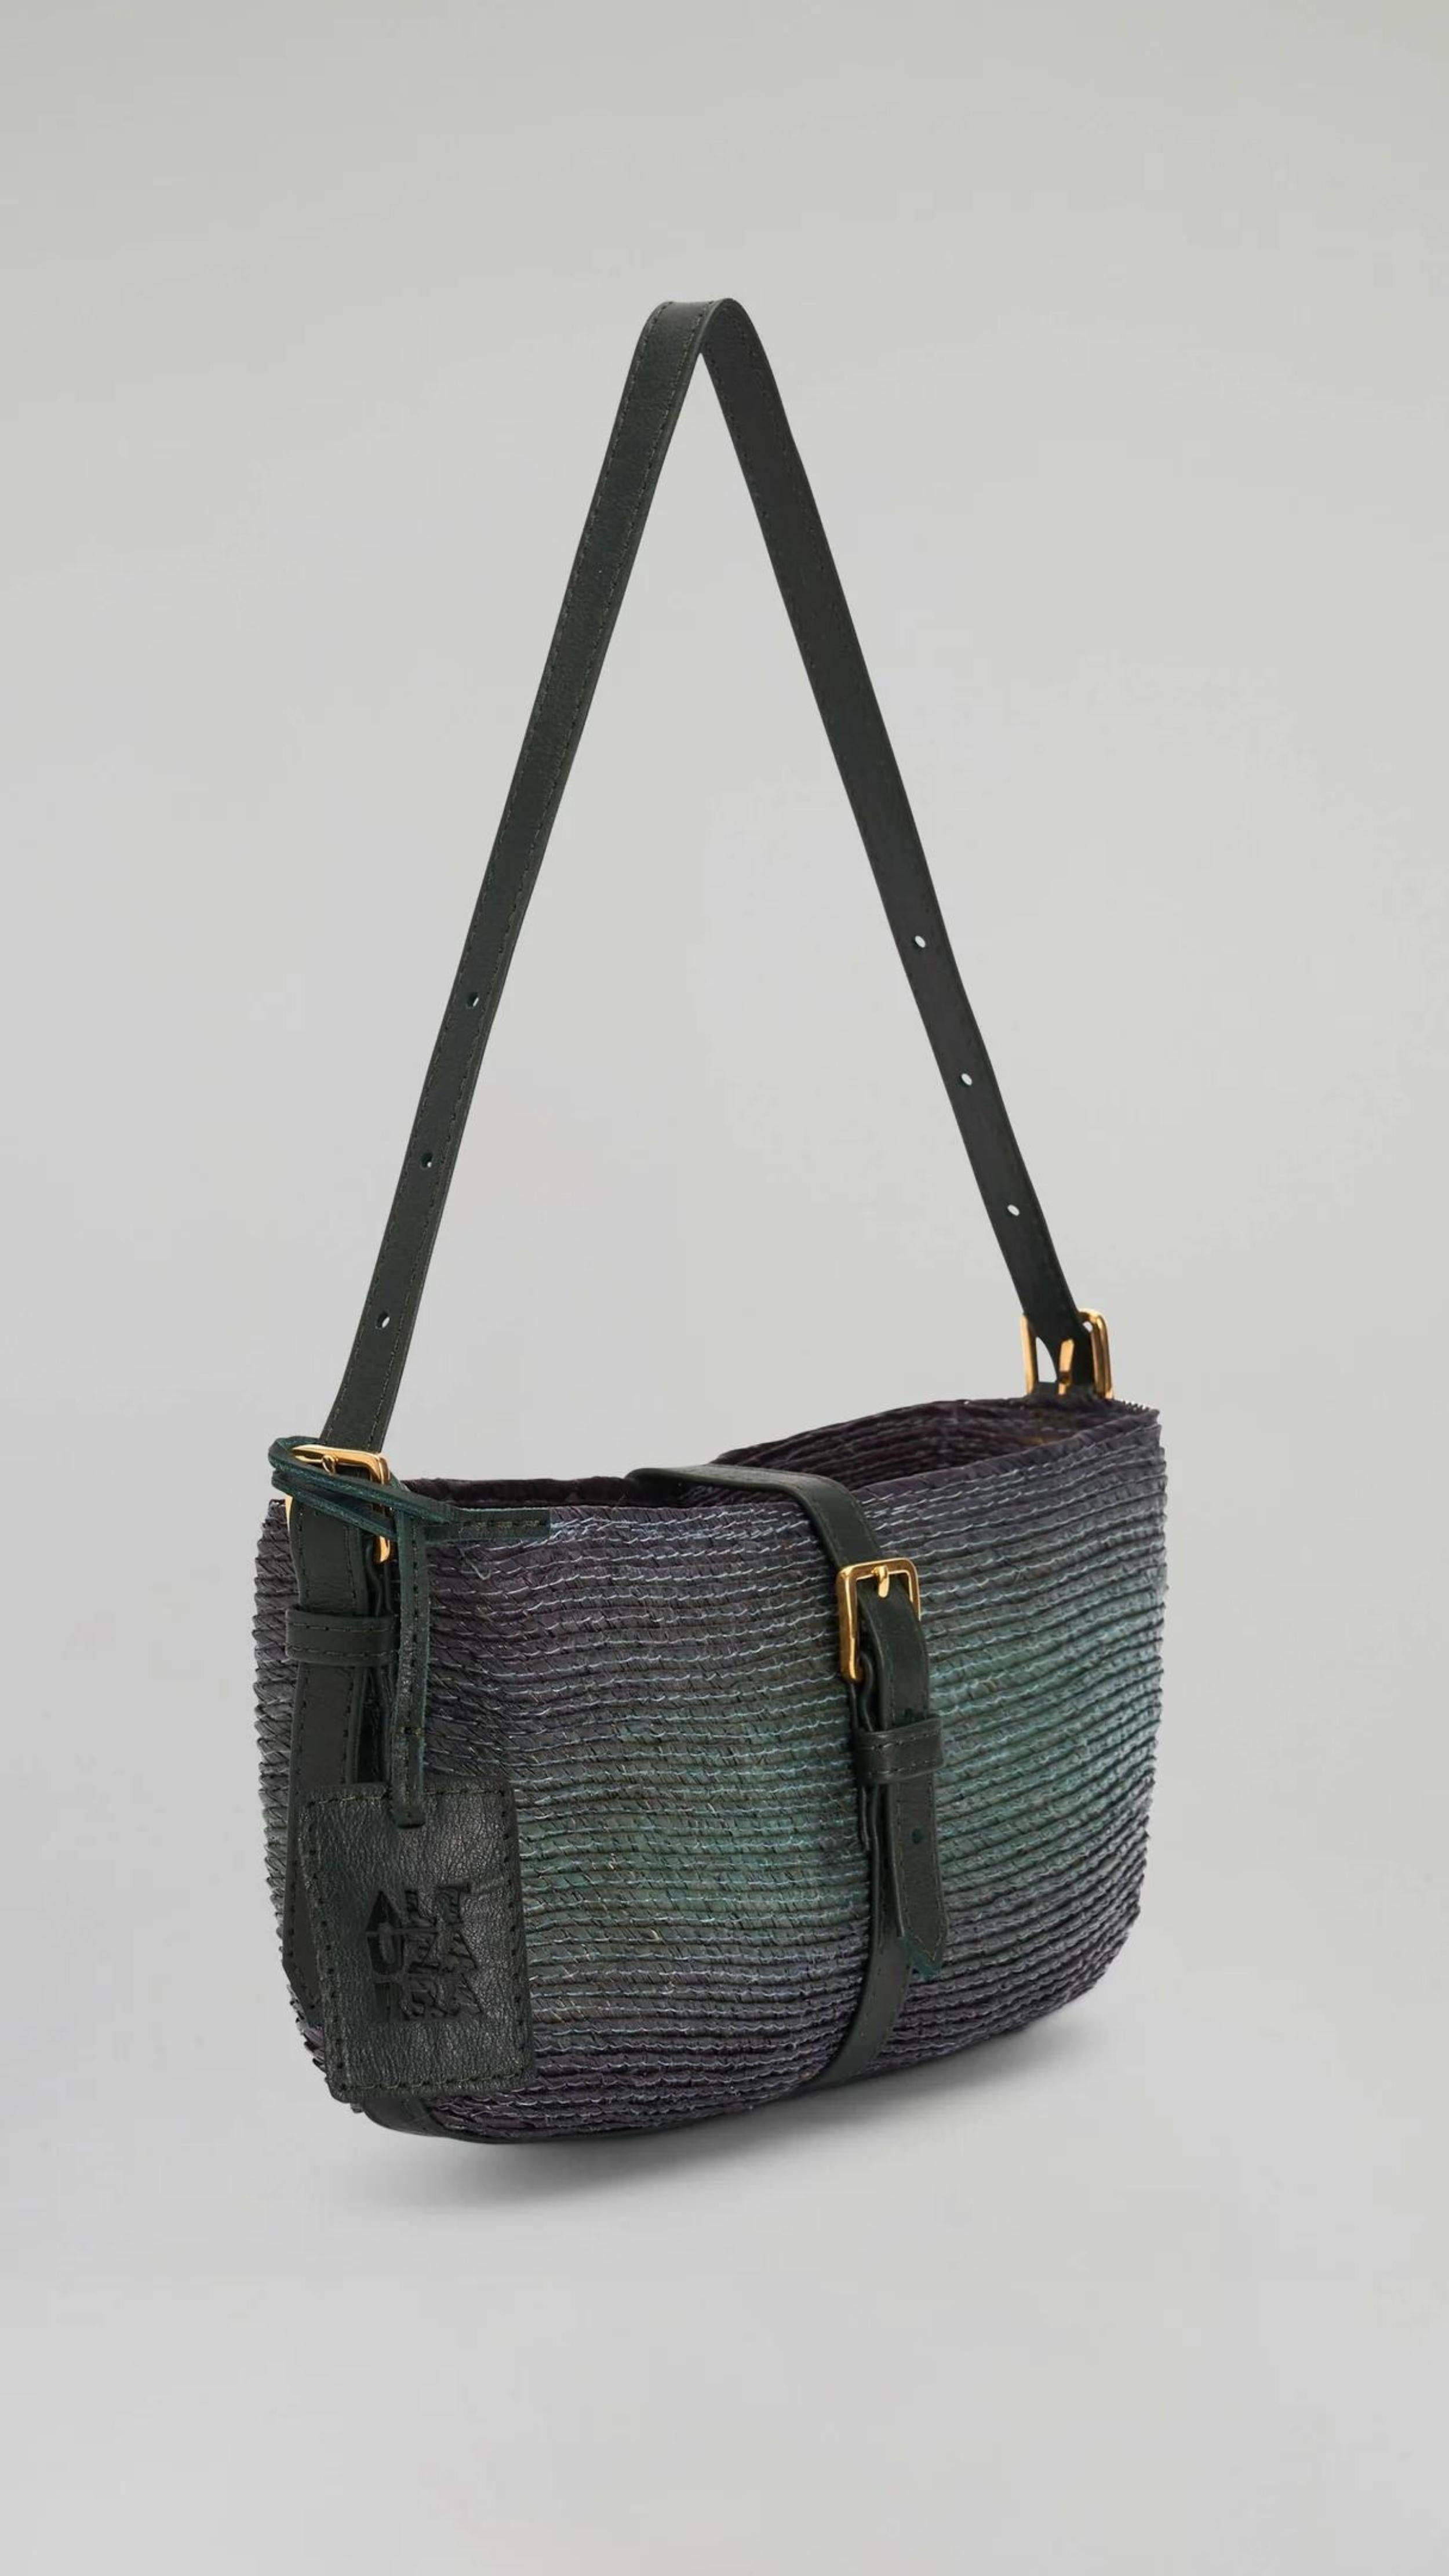 Altuzarra Watermill Shoulder Bag in Campo. Small clutch sized raffia purse in a green and dark blue ombre tone. With navy blue leather details and gold hardware. Photo shown with  front side view. Available at experience 27 in Madrid Spain.